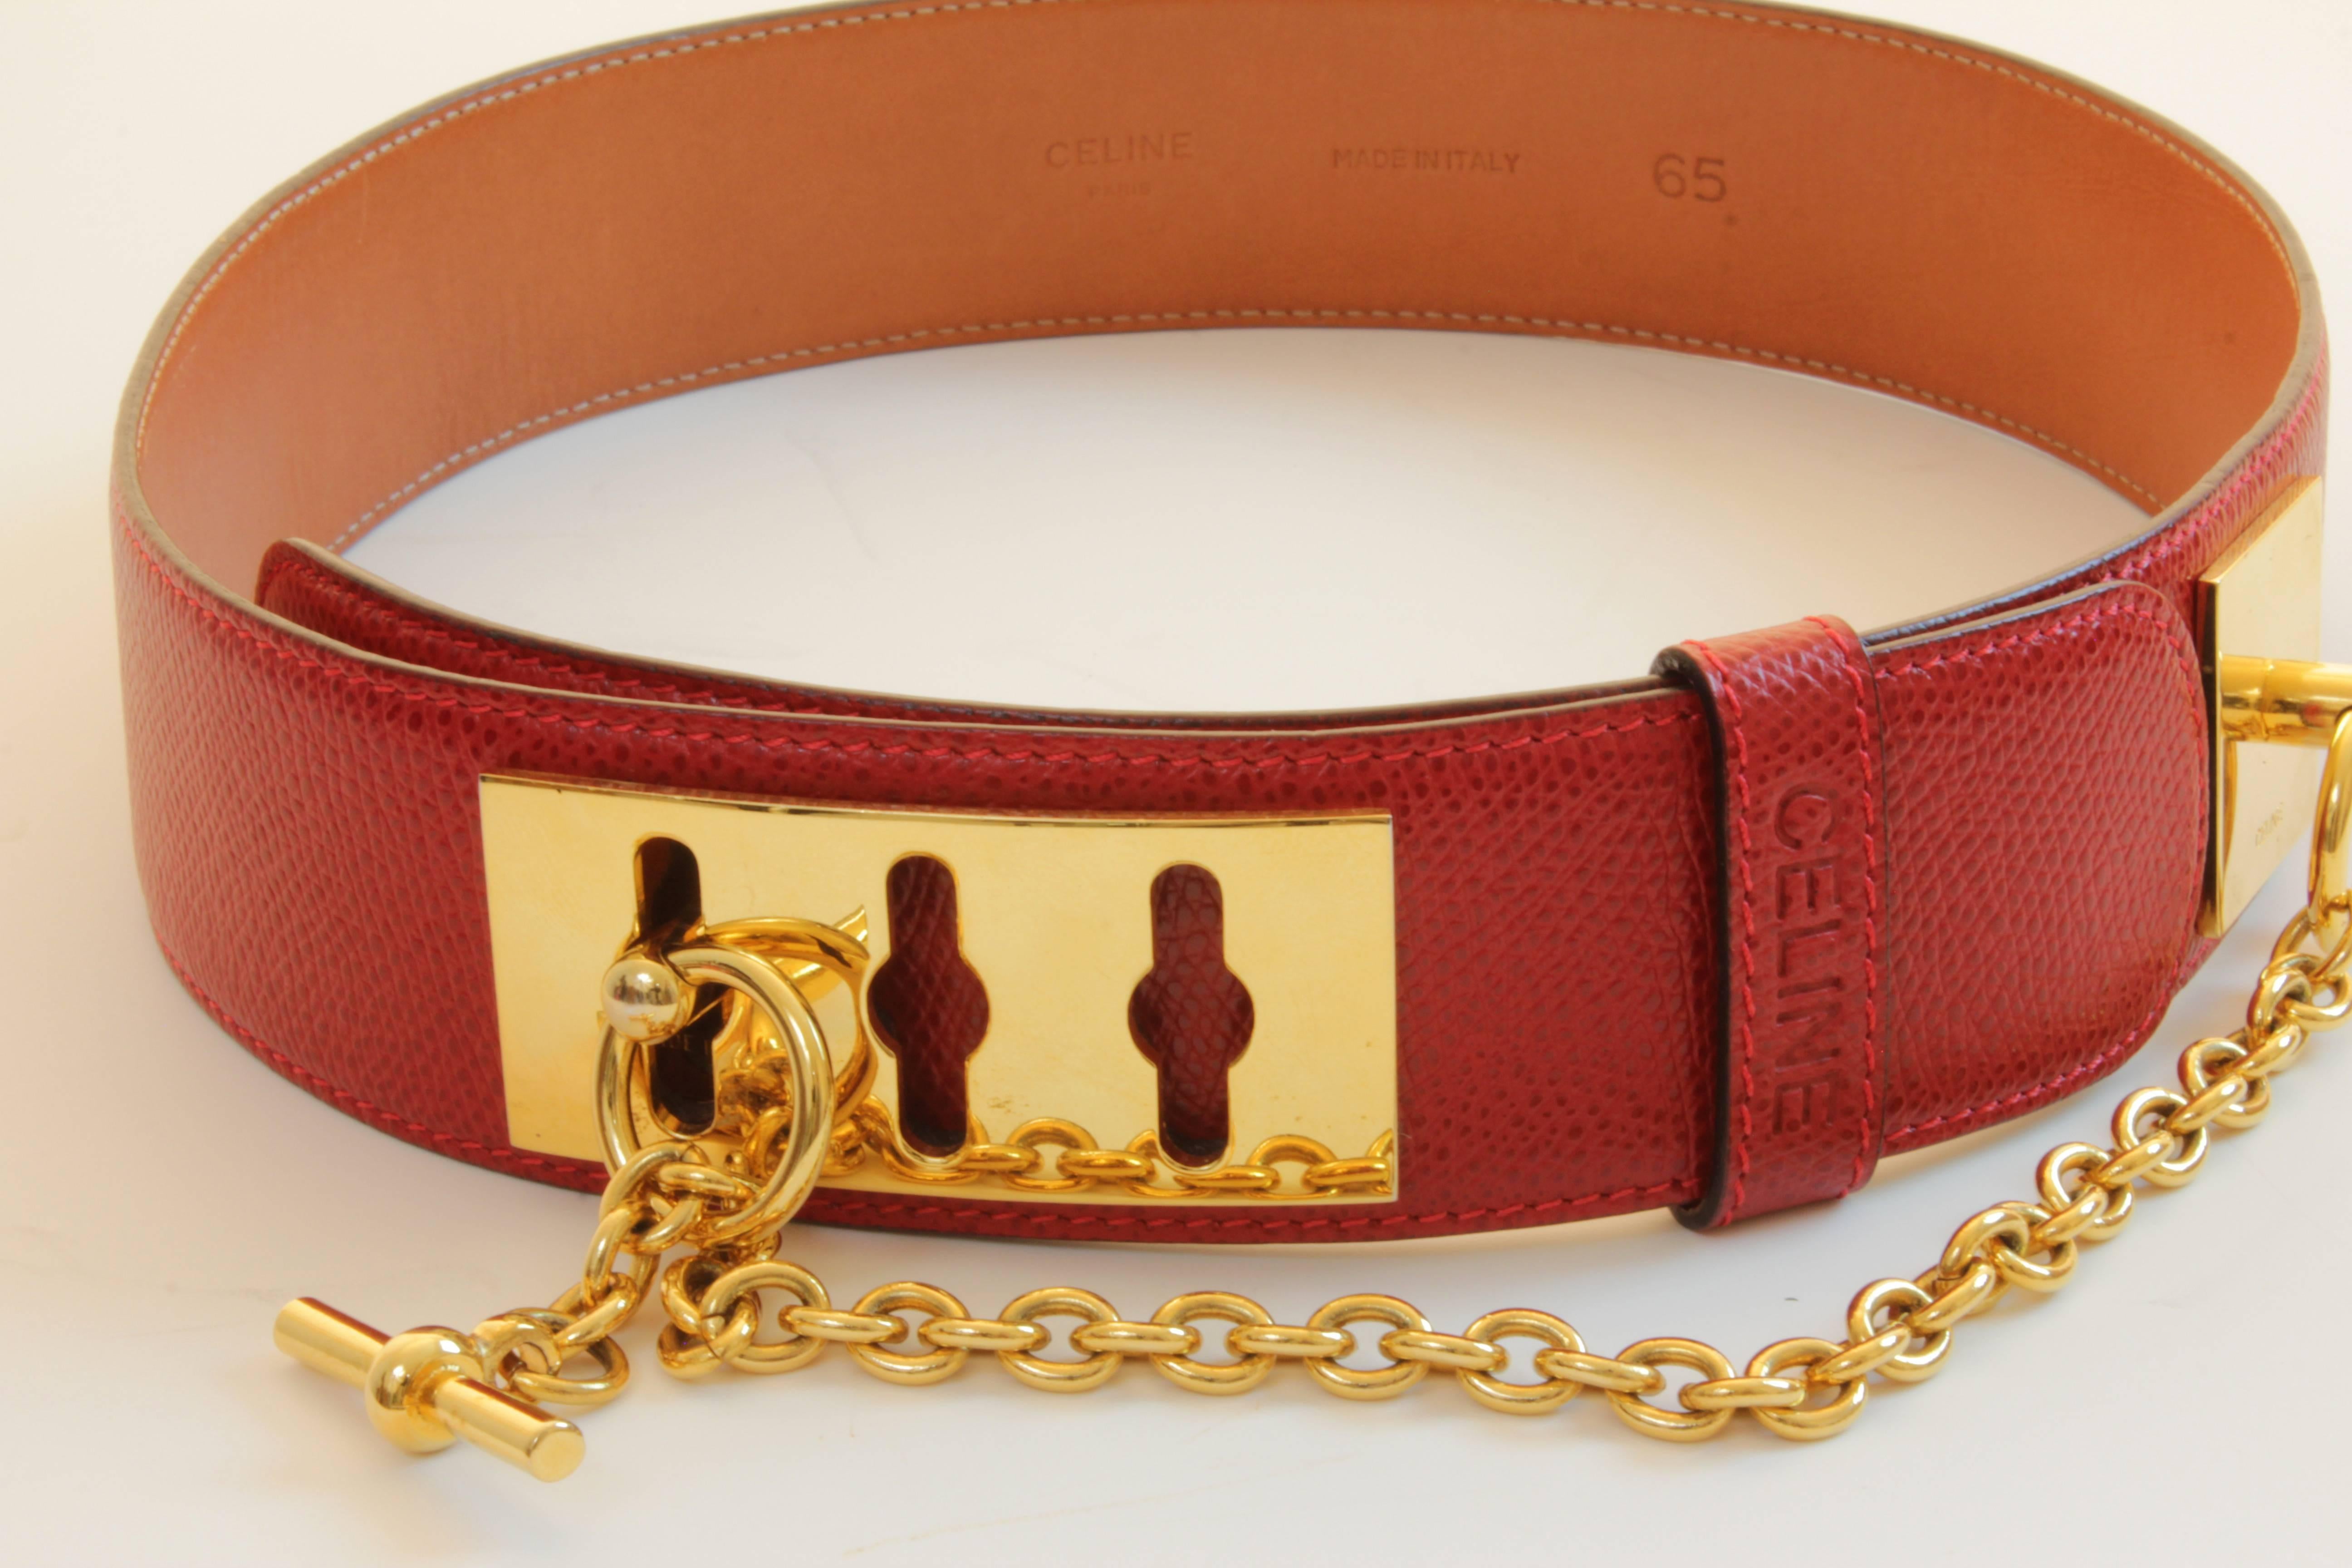 Celine Paris Red Leather Belt with Gold Chain Detail Size 65cm 1